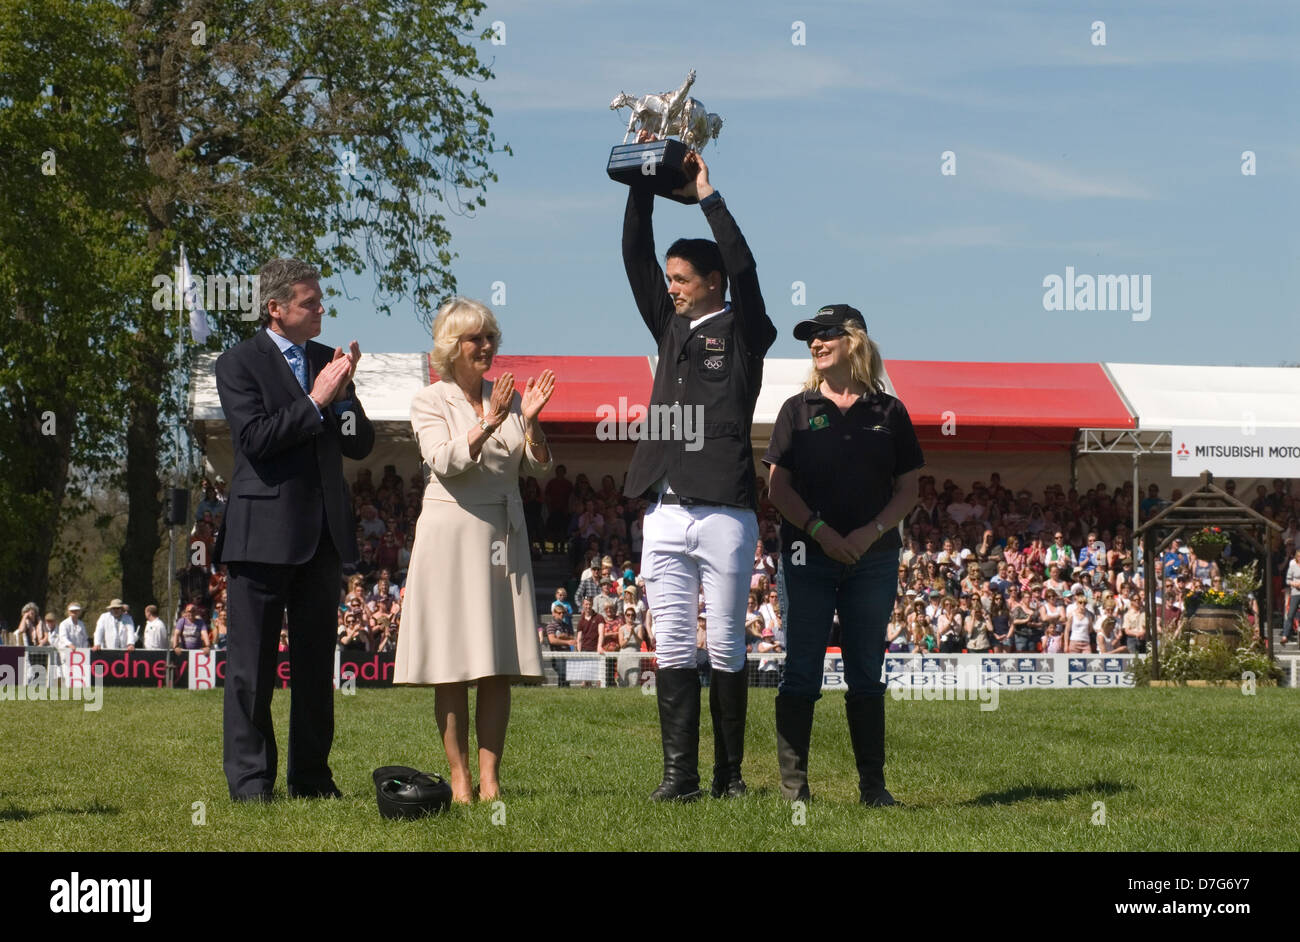 Badminton Horse Trials, New Zealand's Jonathan Jock Paget triumphed in an extraordinary climax to Britain's Mitsubishi Motors Badminton Horse Trials, seen here with Uk chairman of Mitsubishi Motors Lance Bradley  prizes being handed out by HRH Duchess of Cornwall Camilla Parker Bowles, the groom to right of photo. He won on Clifton Promise. Badminton, Gloucestershire, England 6th May 2013. May 2013. 2010s UK  HOMER SYKES Stock Photo